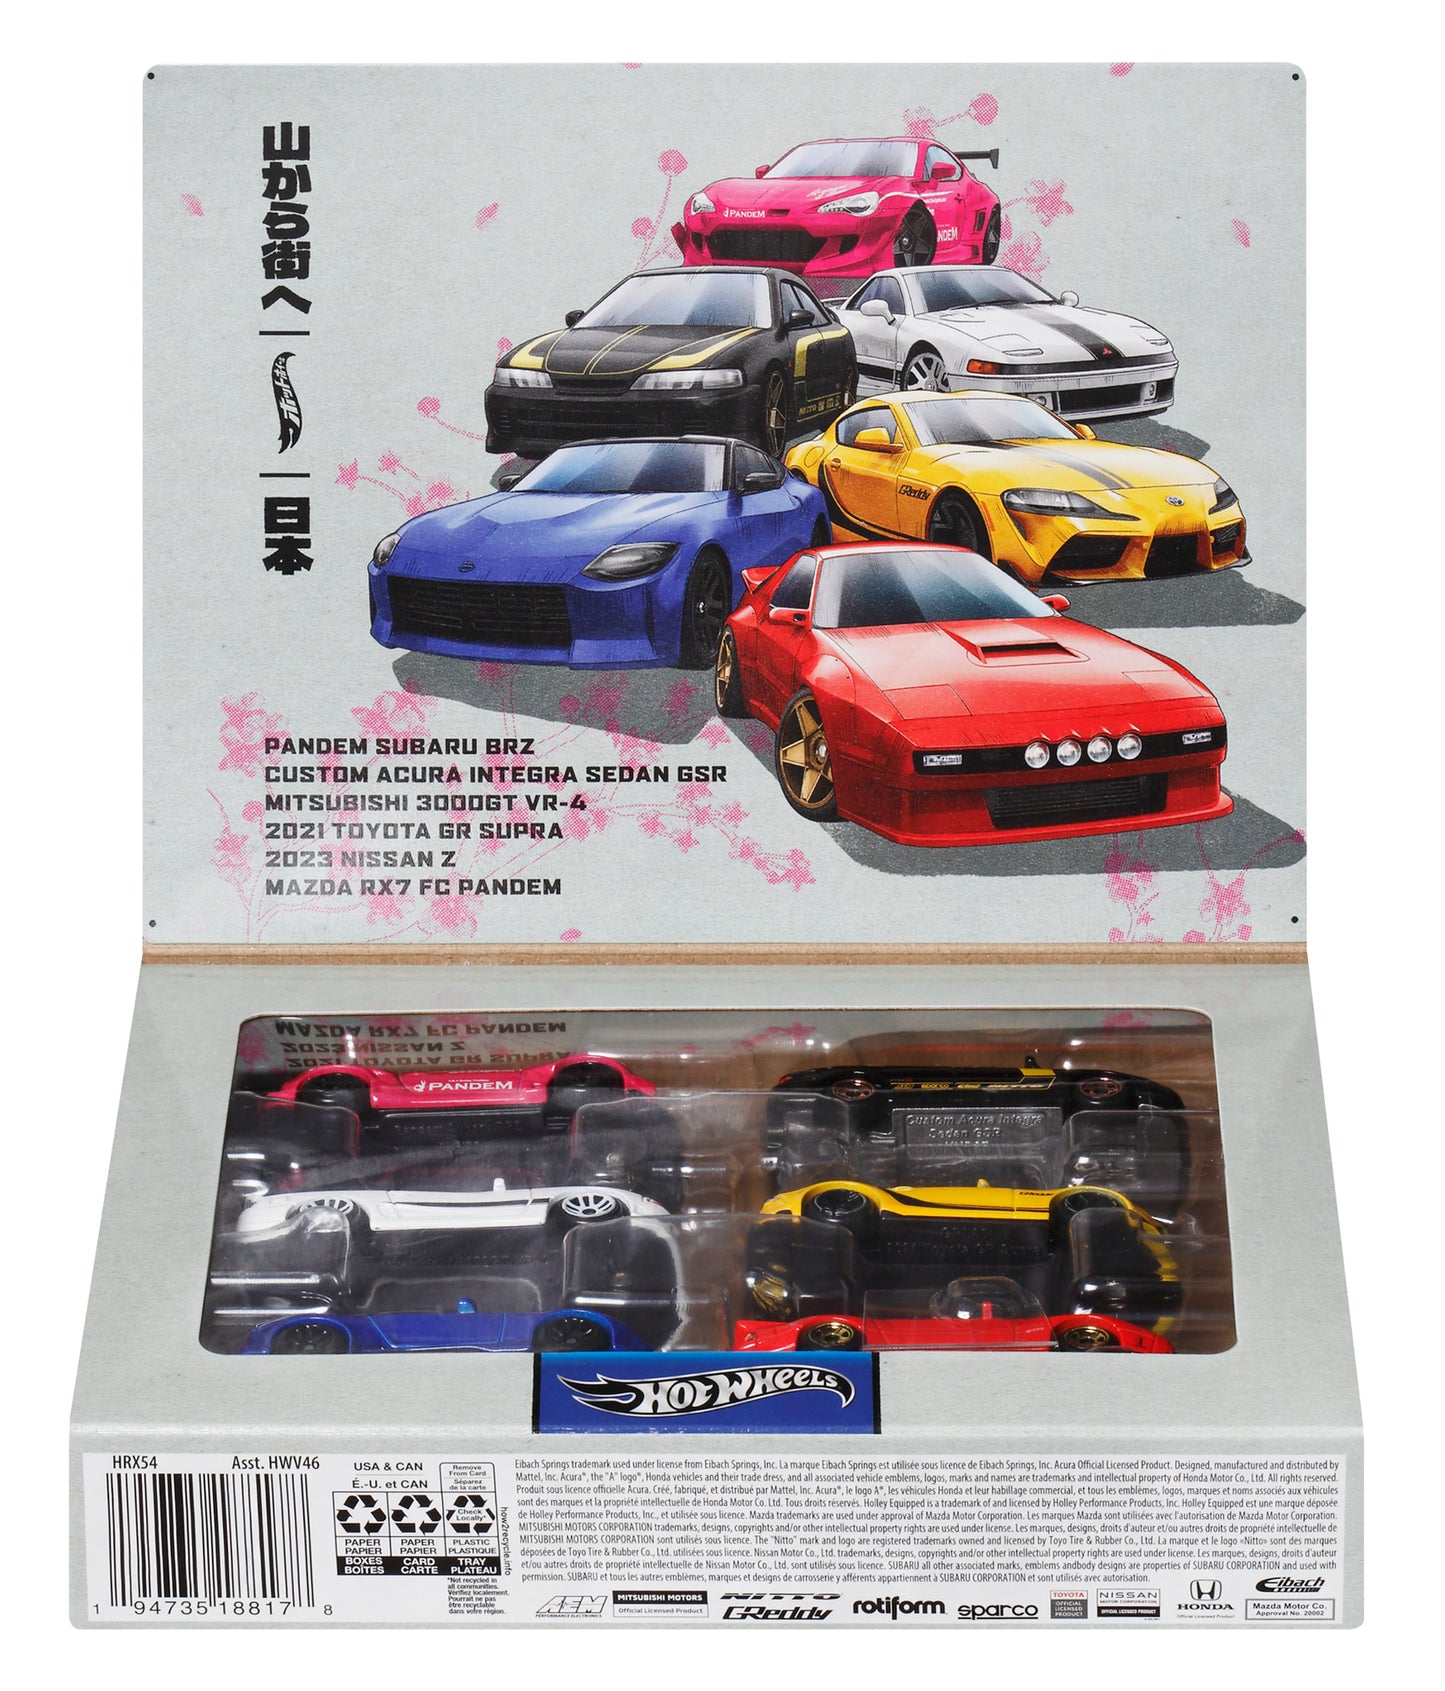 Hot Wheels 1:64 Scale Die-Cast Toy Cars, Assorted